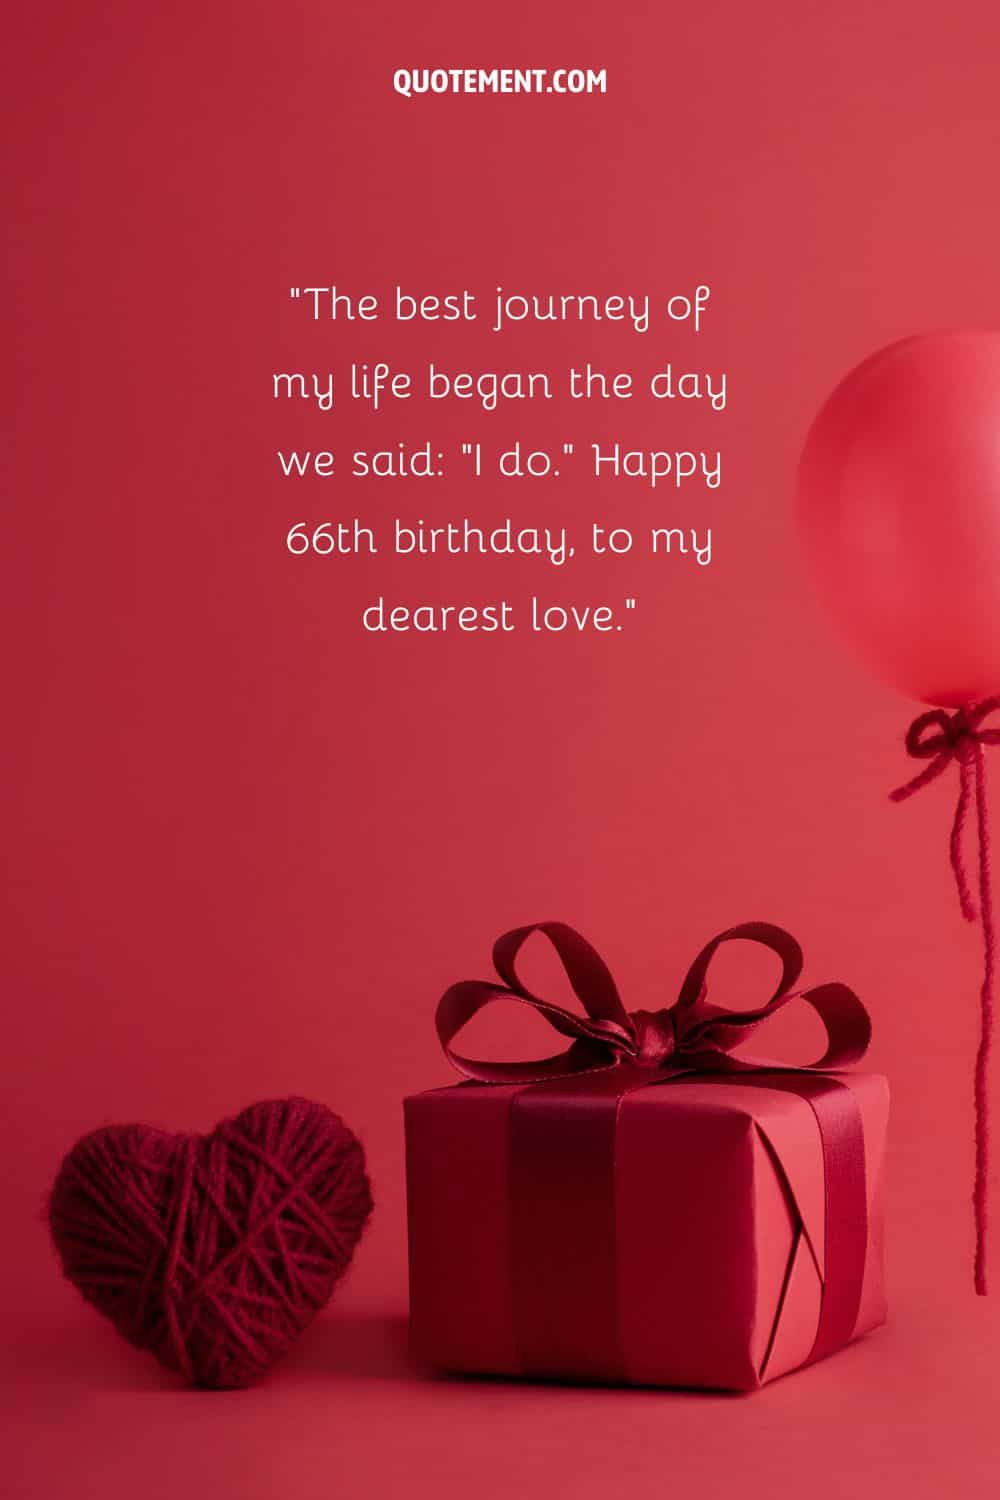 image of a red birthday box and a heart representing a 66th birthday wish